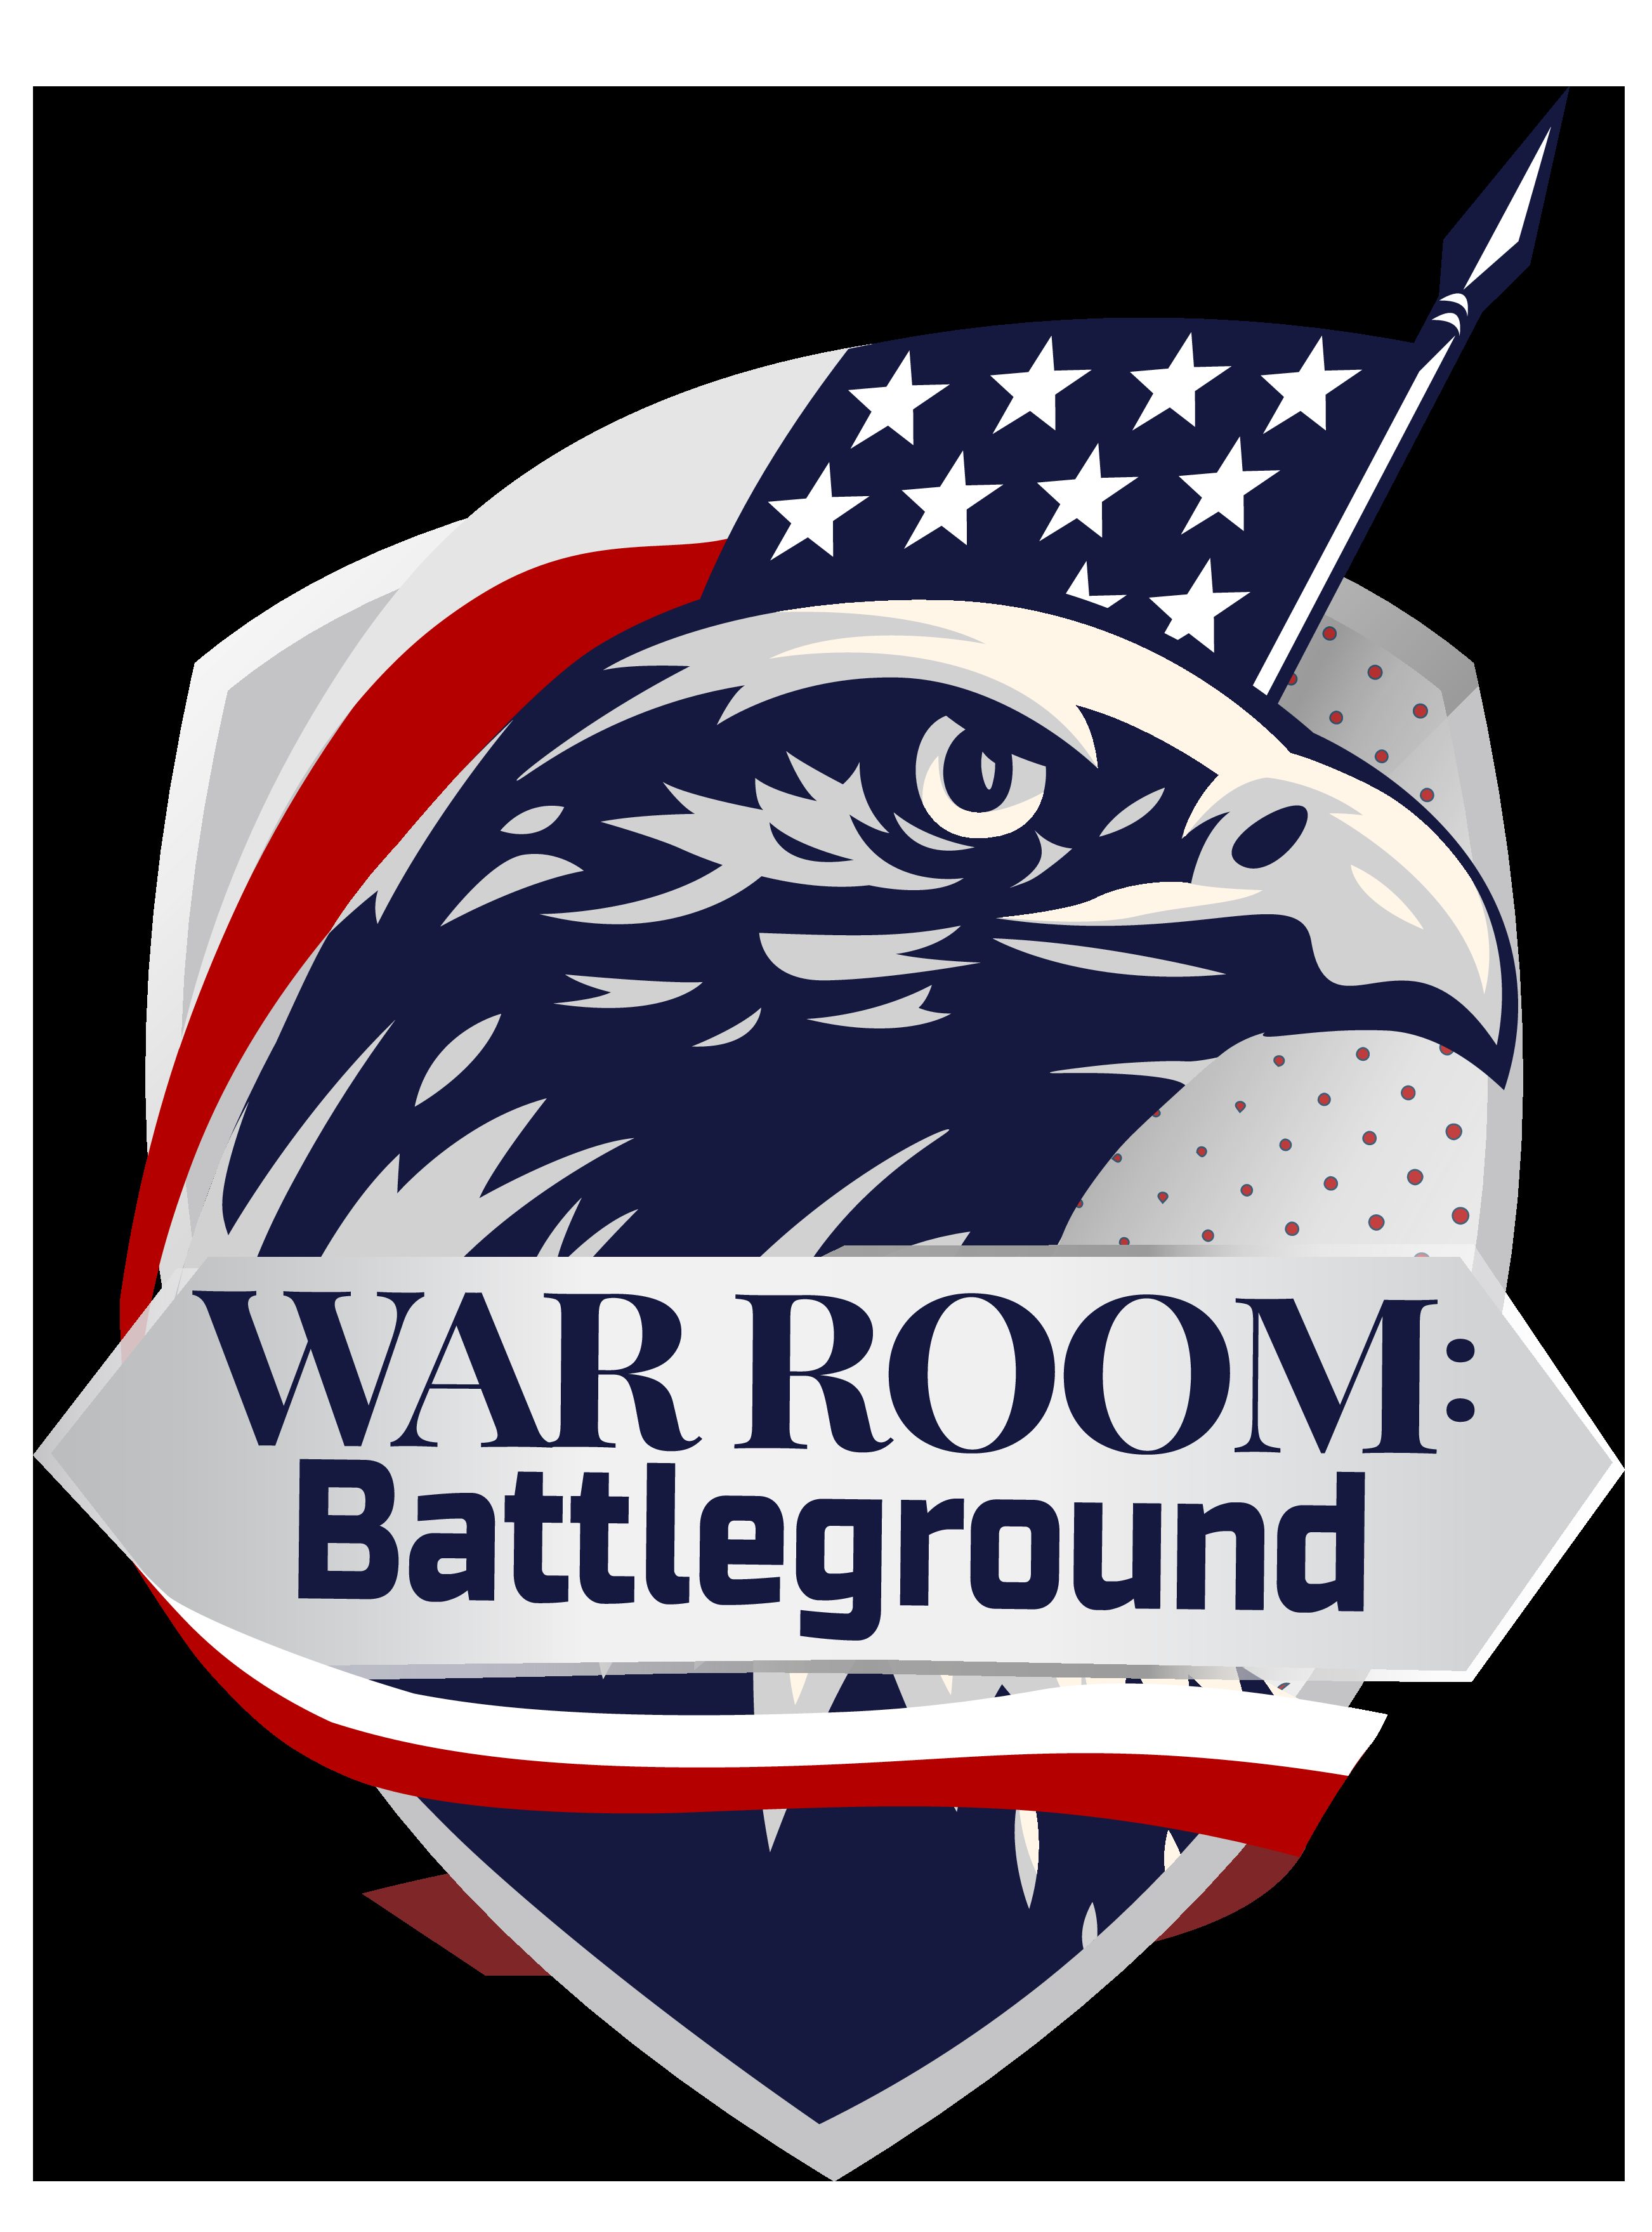 WarRoom Battleground EP 243: The Threat Against Taiwan And Lies Of The CCP